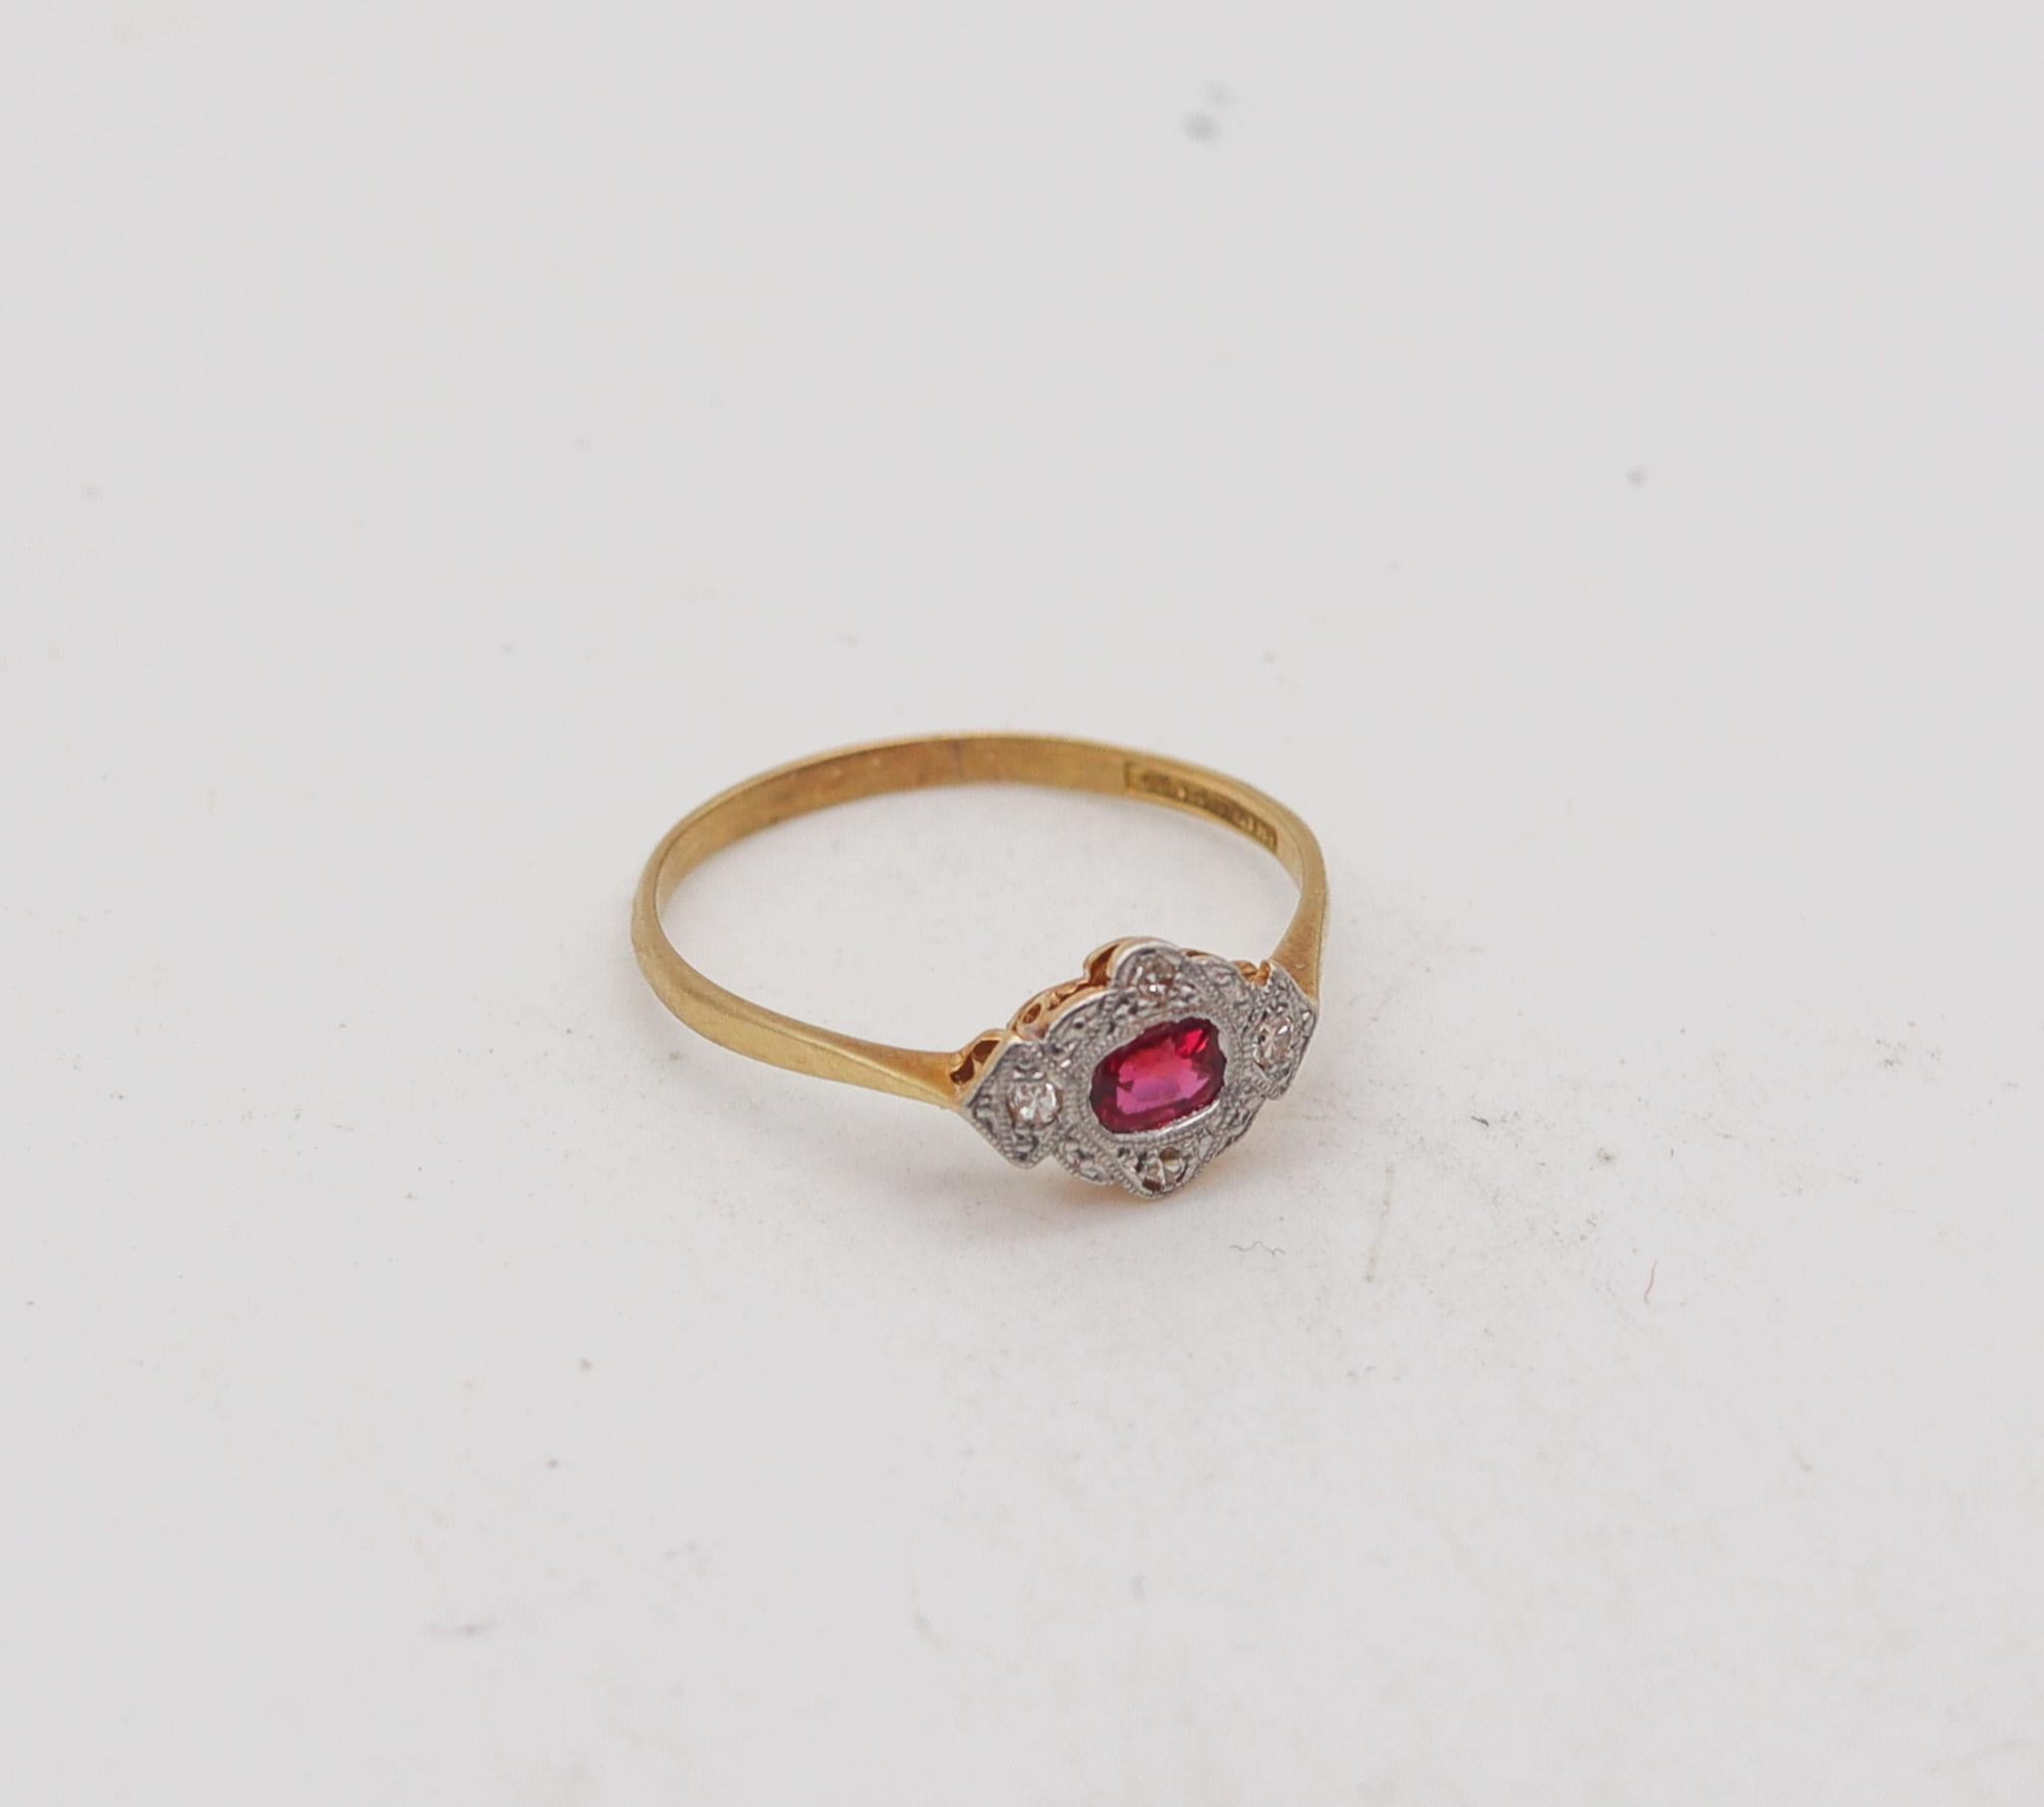 Old European Cut Edwardian 1905 Ring In 18Kt Yellow Gold And Platinum With Diamonds And Ruby For Sale